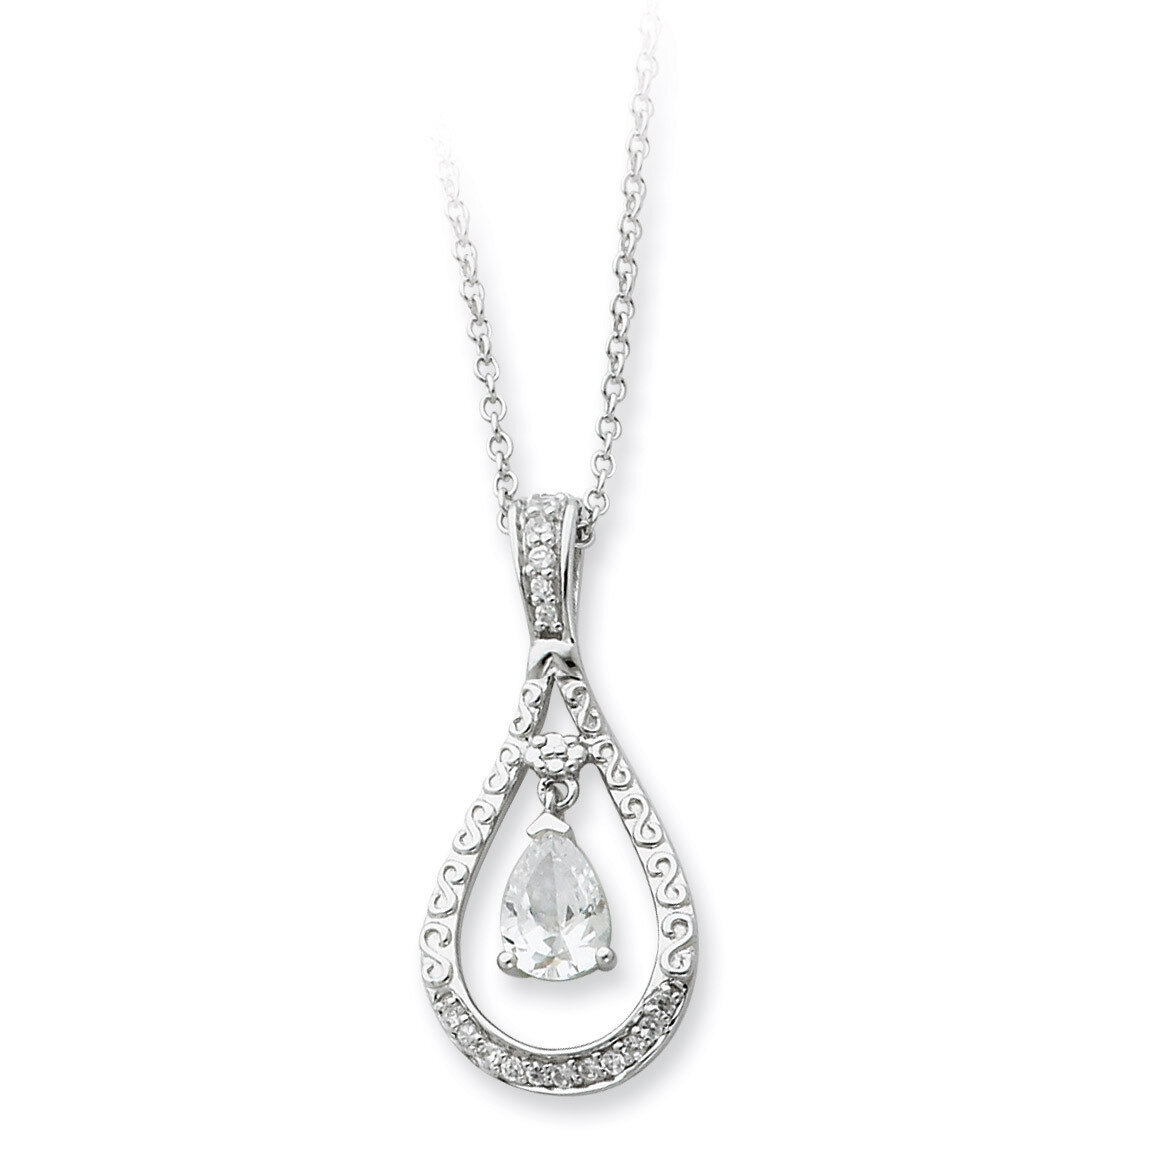 April Diamond Stone Never Forget Tear 18 Inch Birthstone Necklace Sterling Silver QSX183